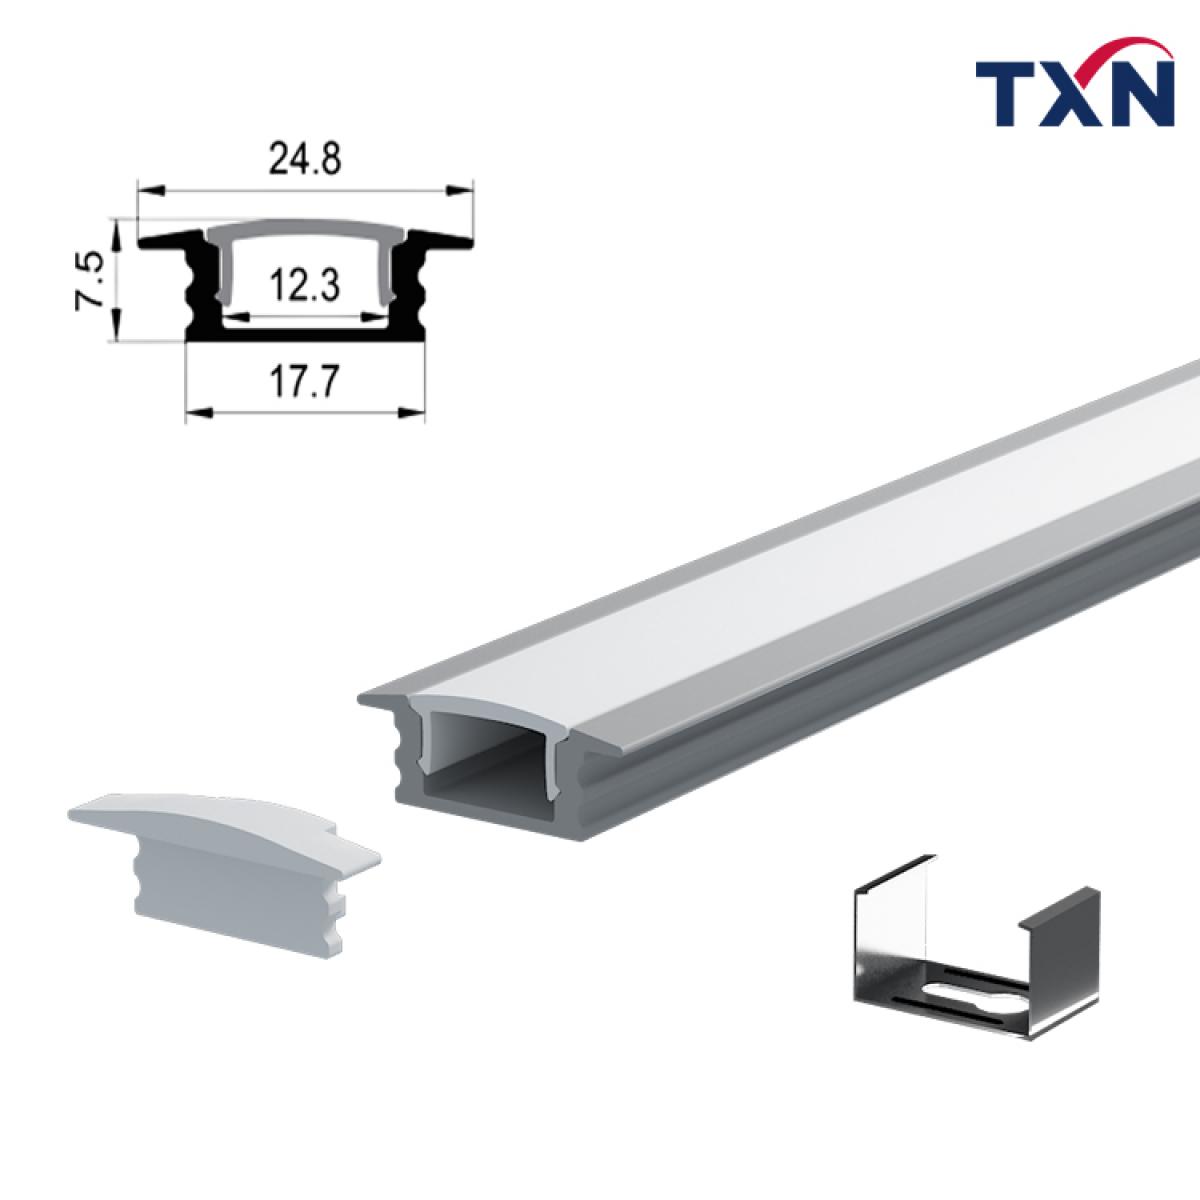 TXN-2507 Best Price LED Aluminium Profile From China Supplier